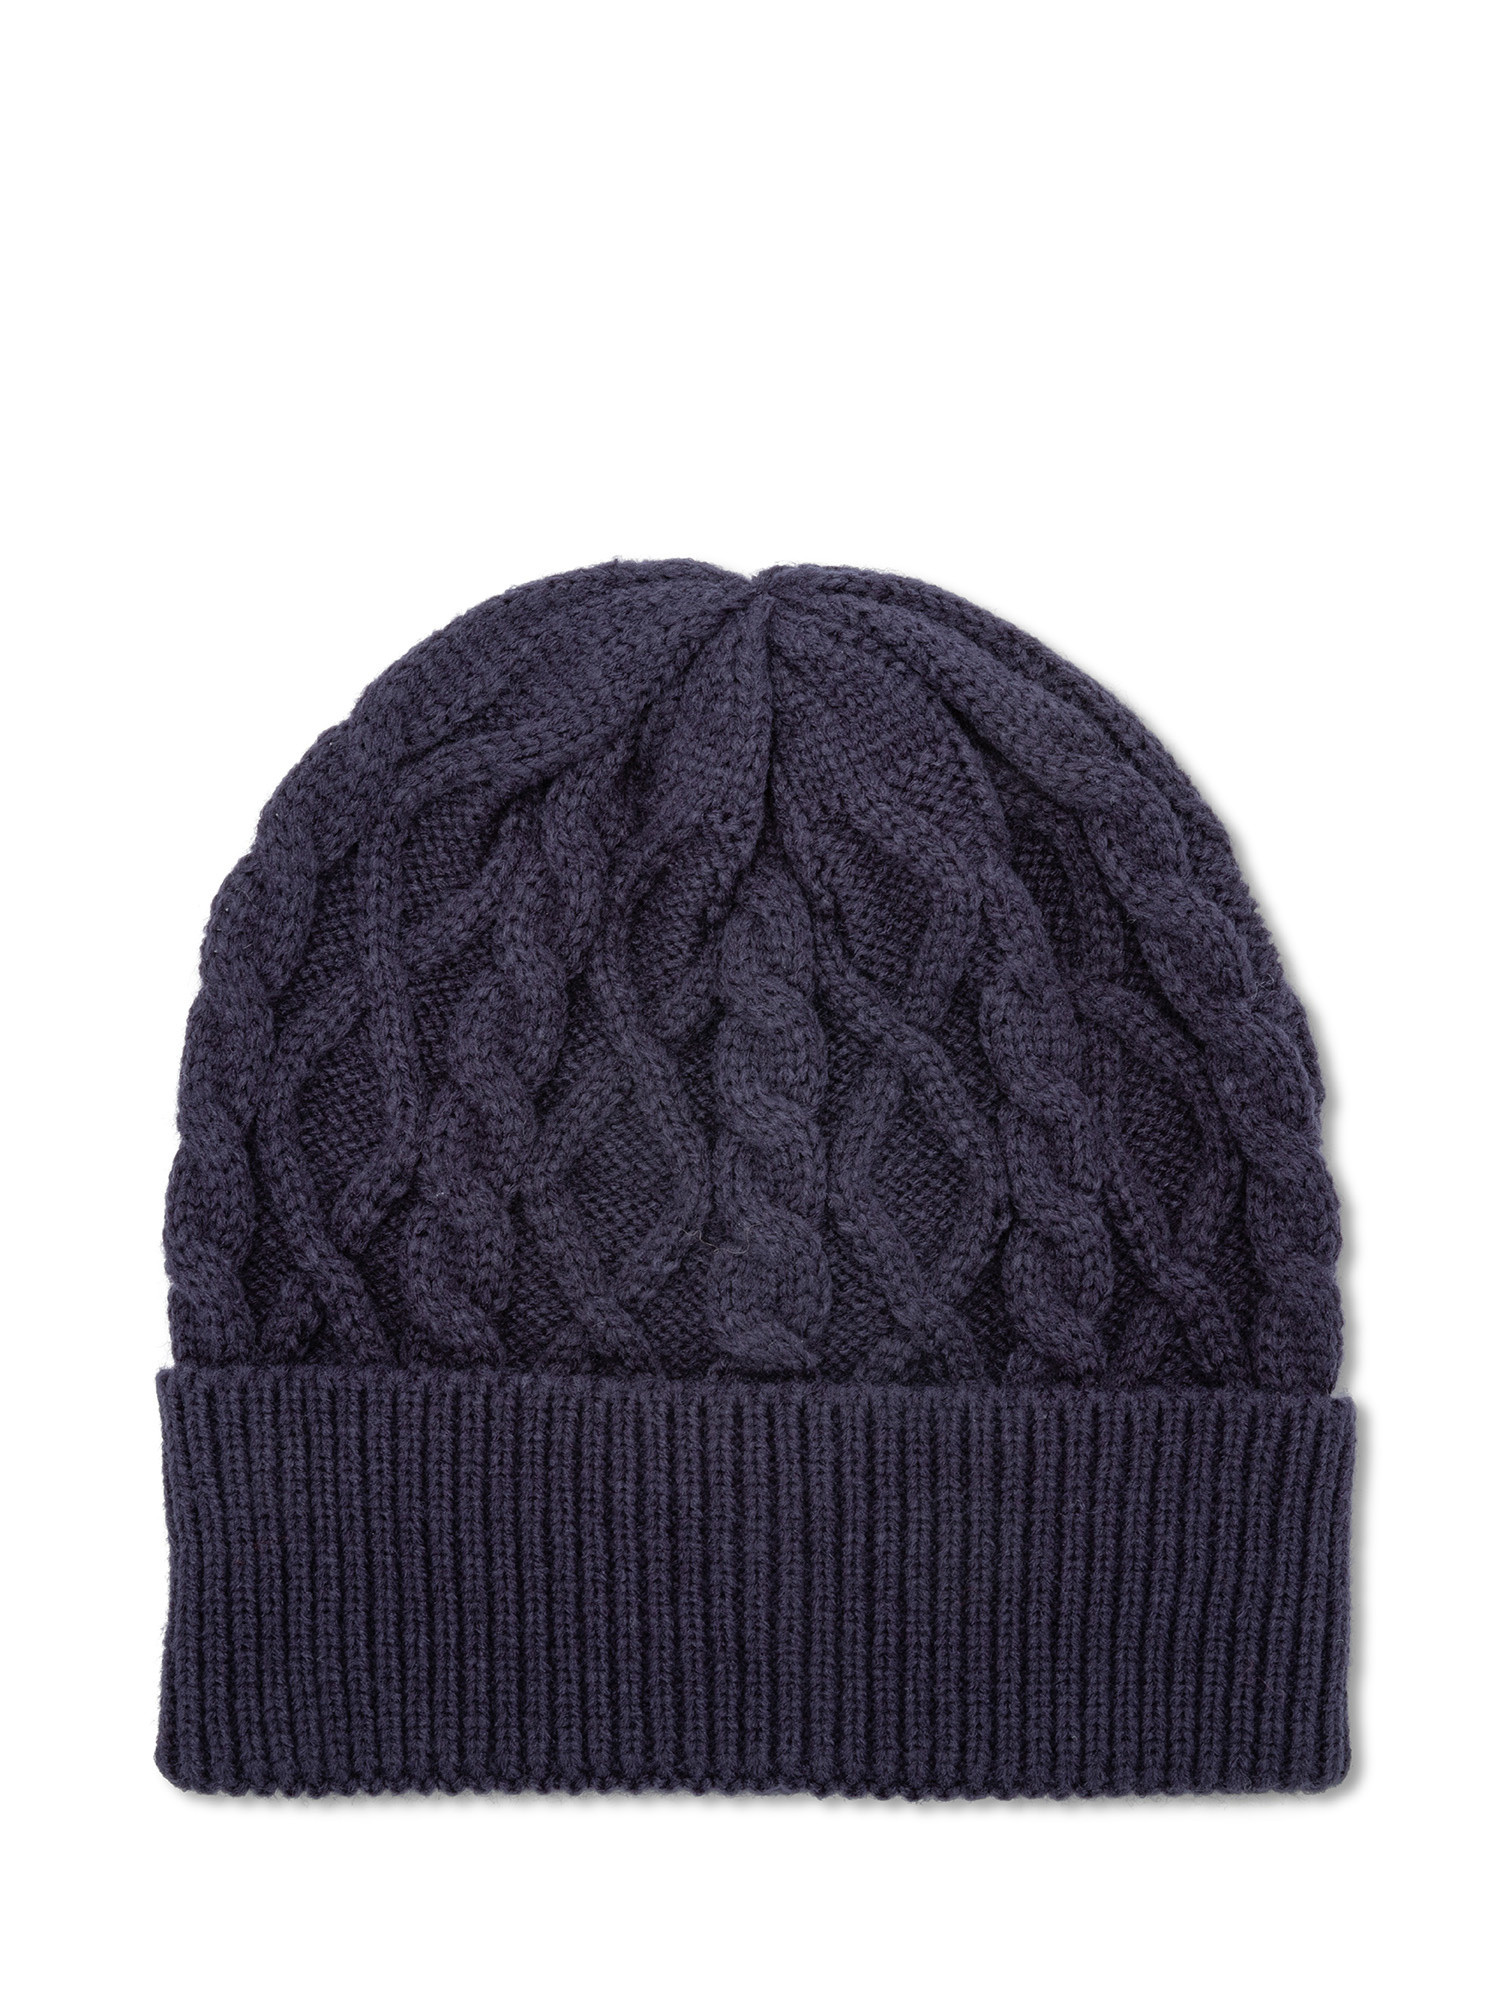 Luca D'Altieri - Beanie with knitted pattern, Dark Blue, large image number 0